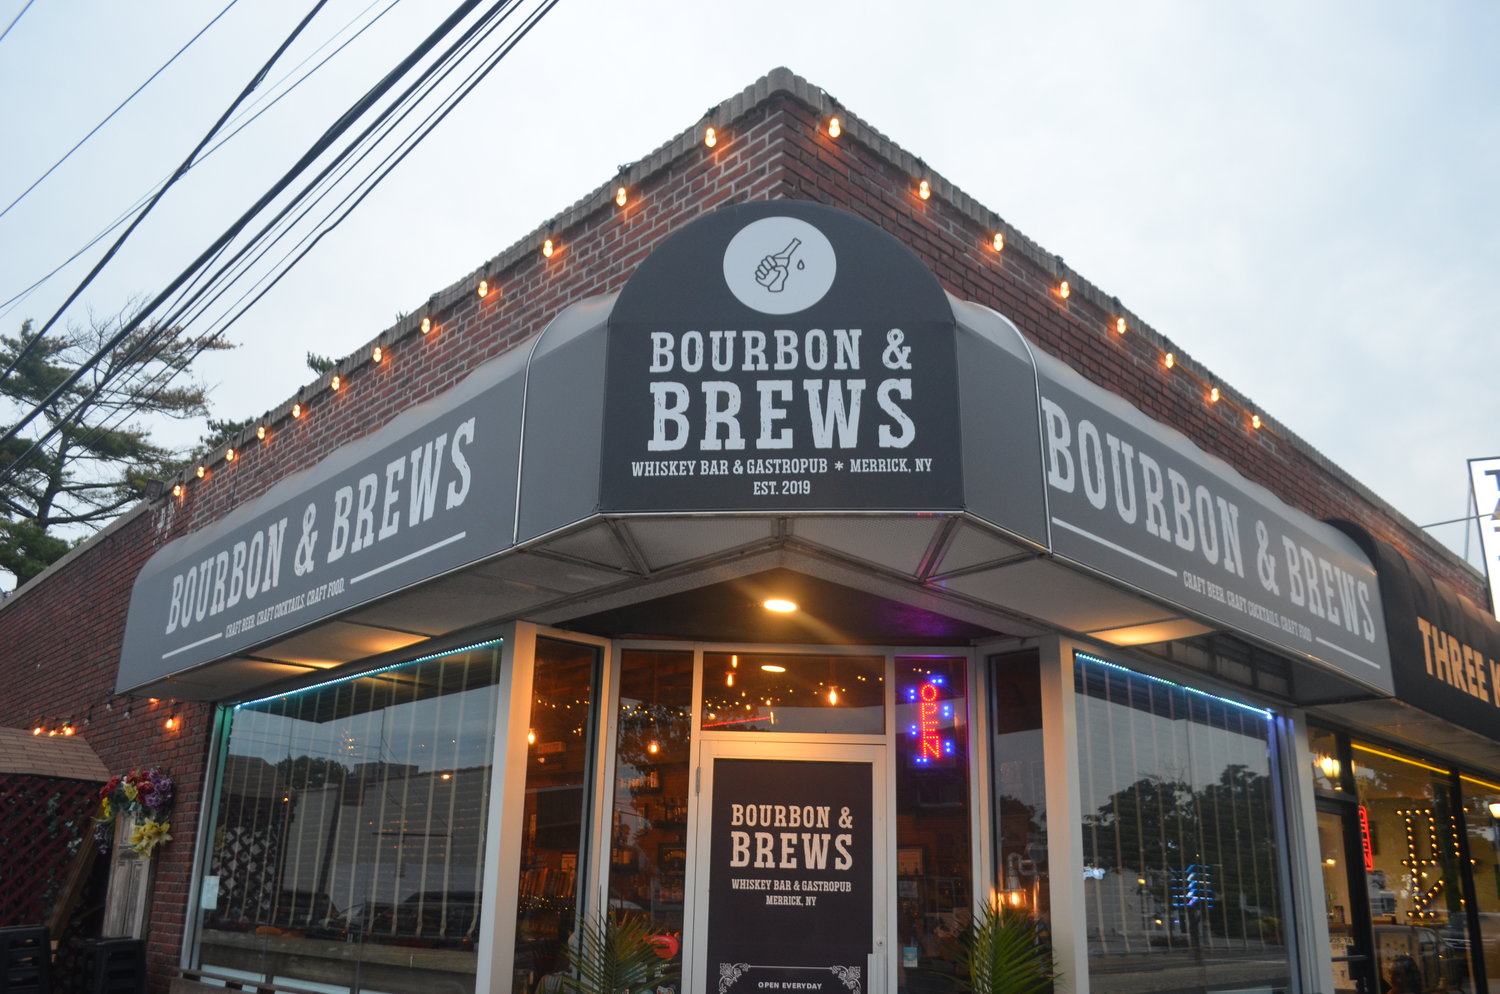 Bourbon & Brews, a craft beer and bourbon bar in Merrick, hosted a charity comedy night to raise funds for St. Jude’s Children’s Research Hospital.